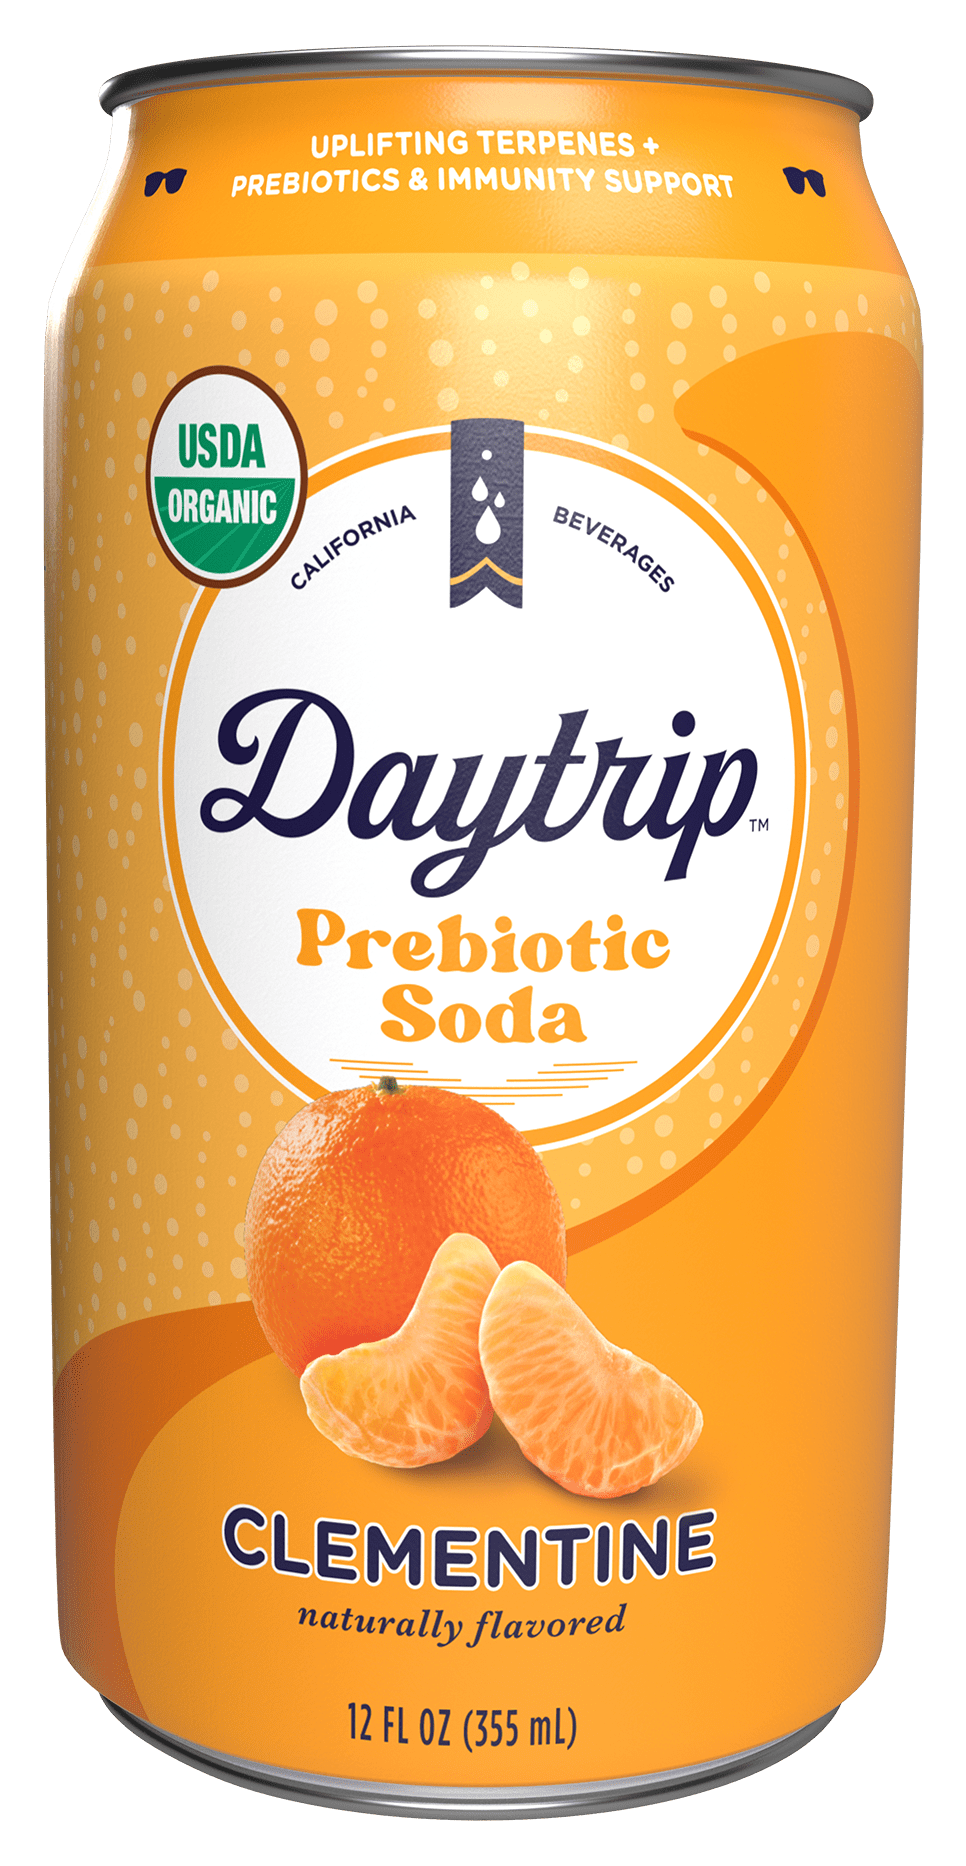  Front can render of Daytrip clementine prebiotic soda.